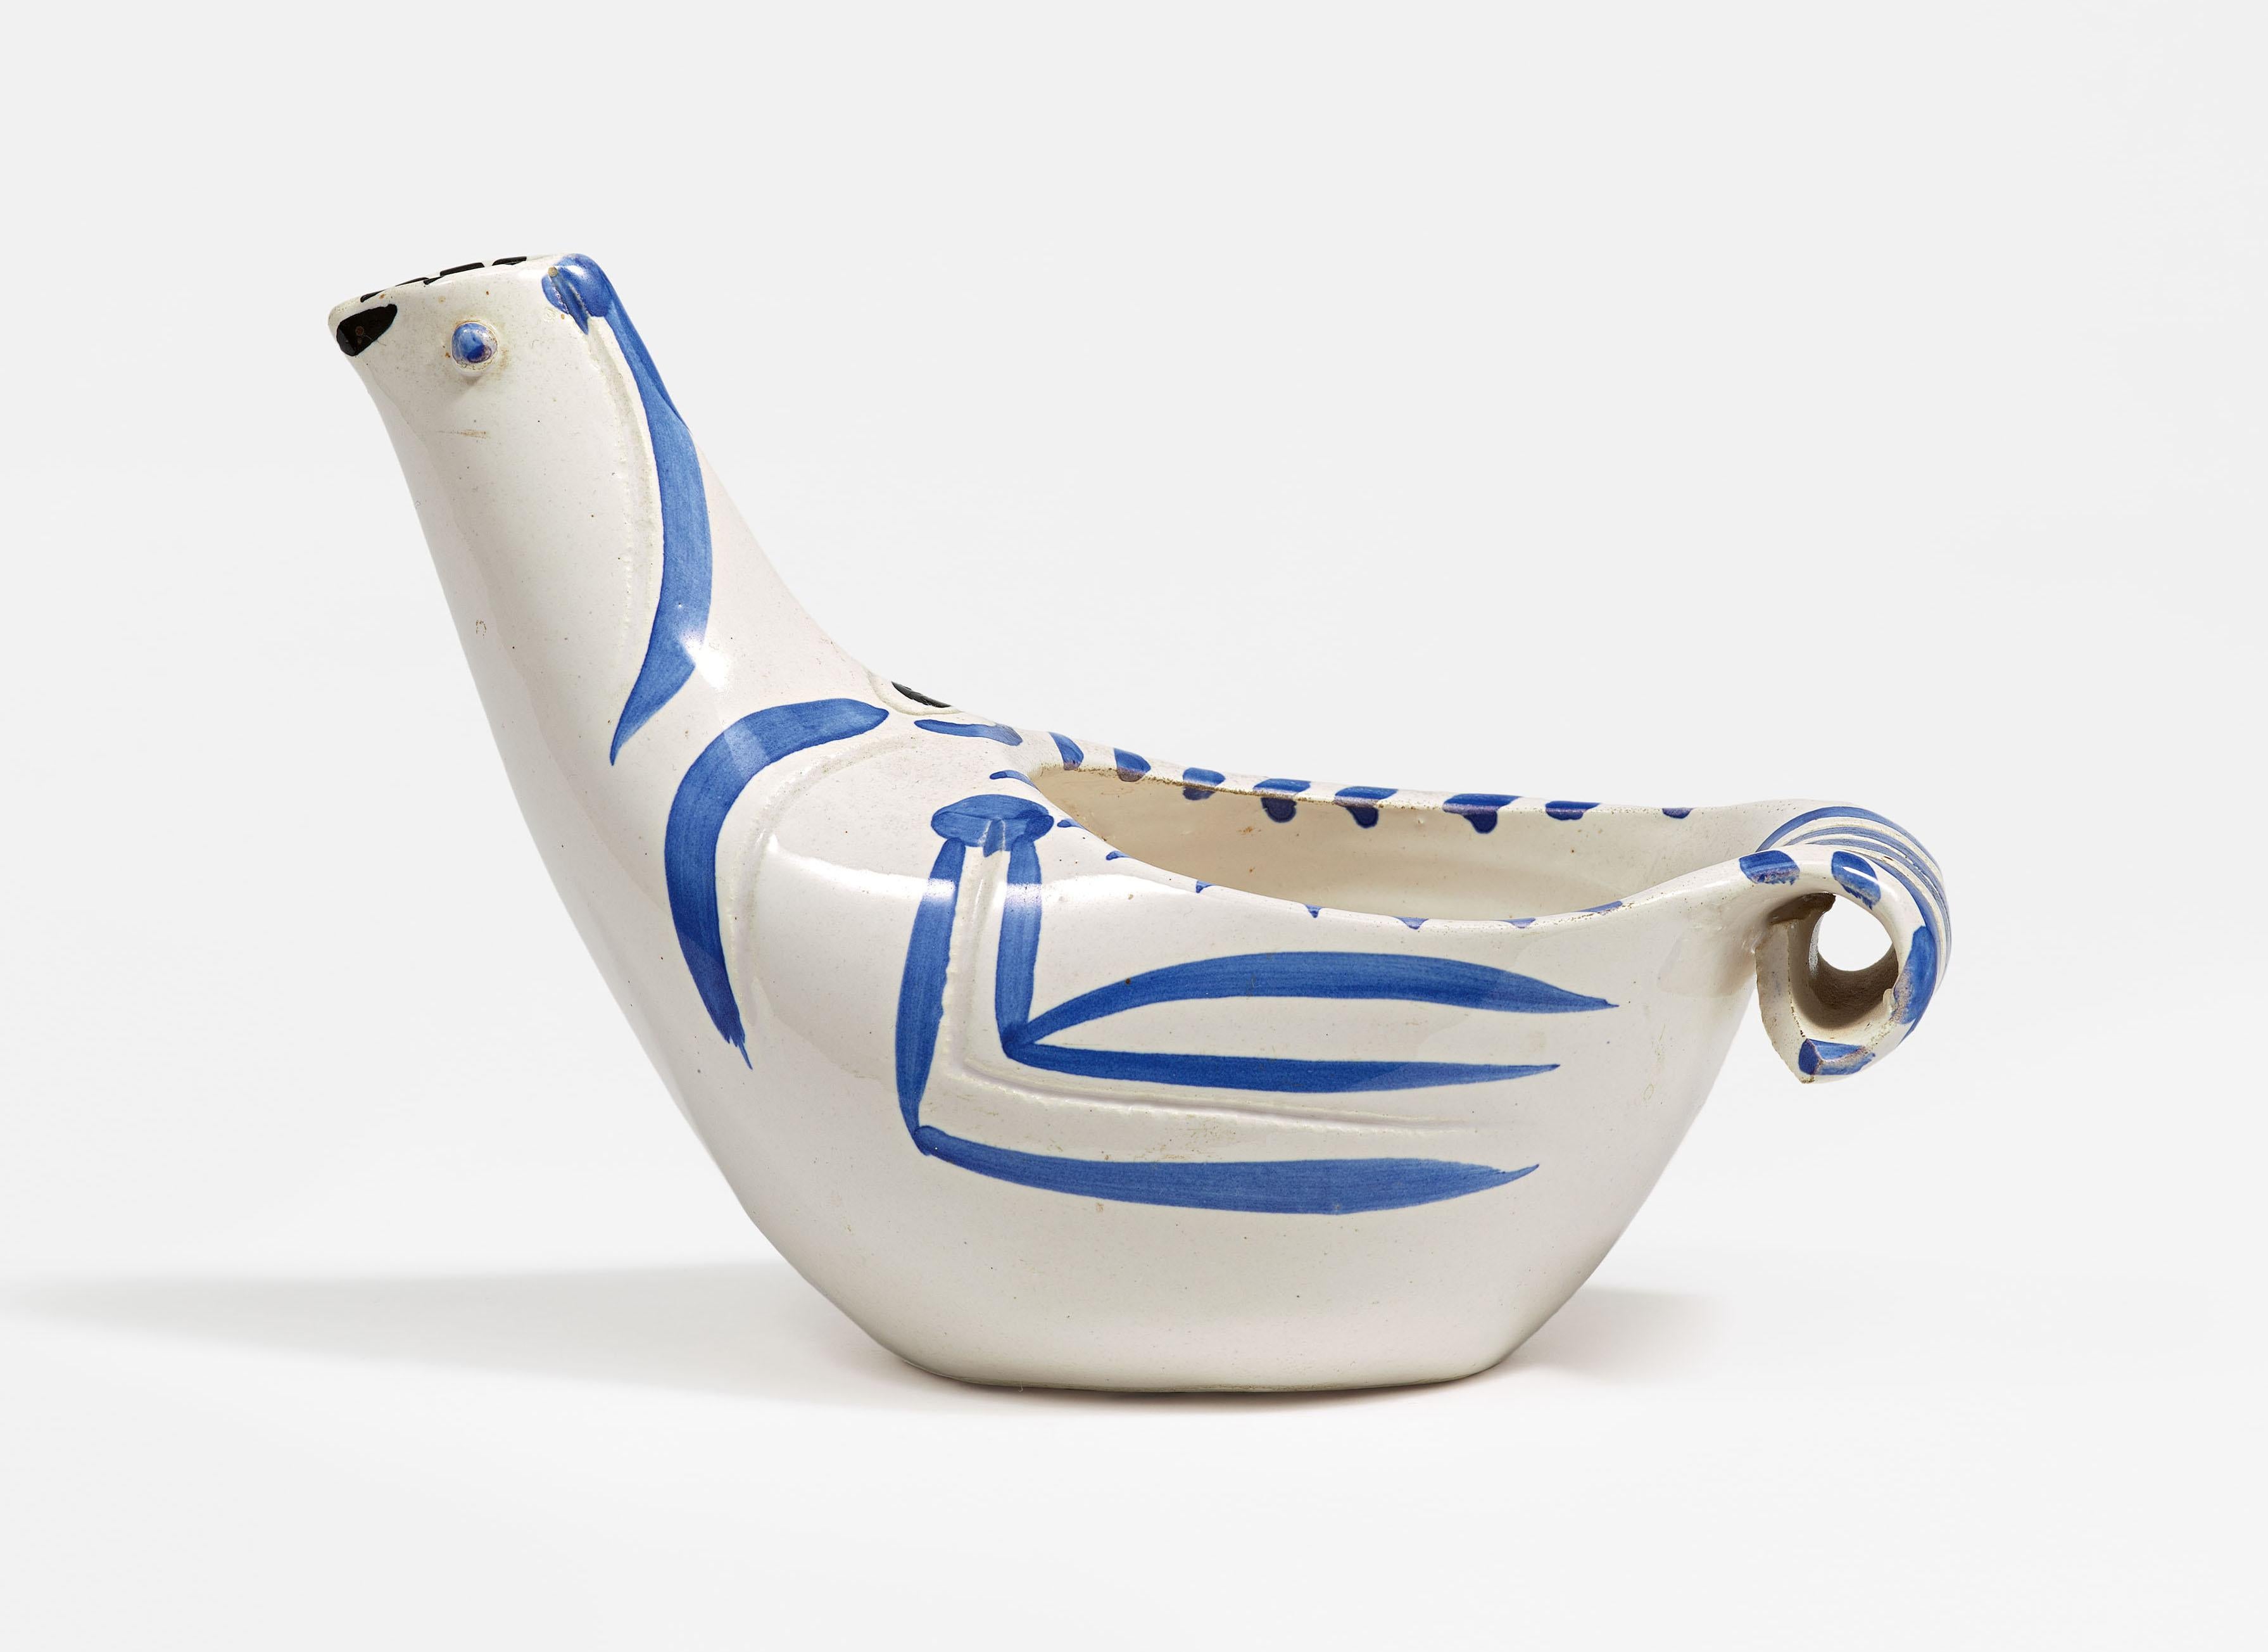 Sujet Colombe (A.R. 435). Ceramic Stamped Madoura Plein Feu, Edition Picasso - Art by Pablo Picasso